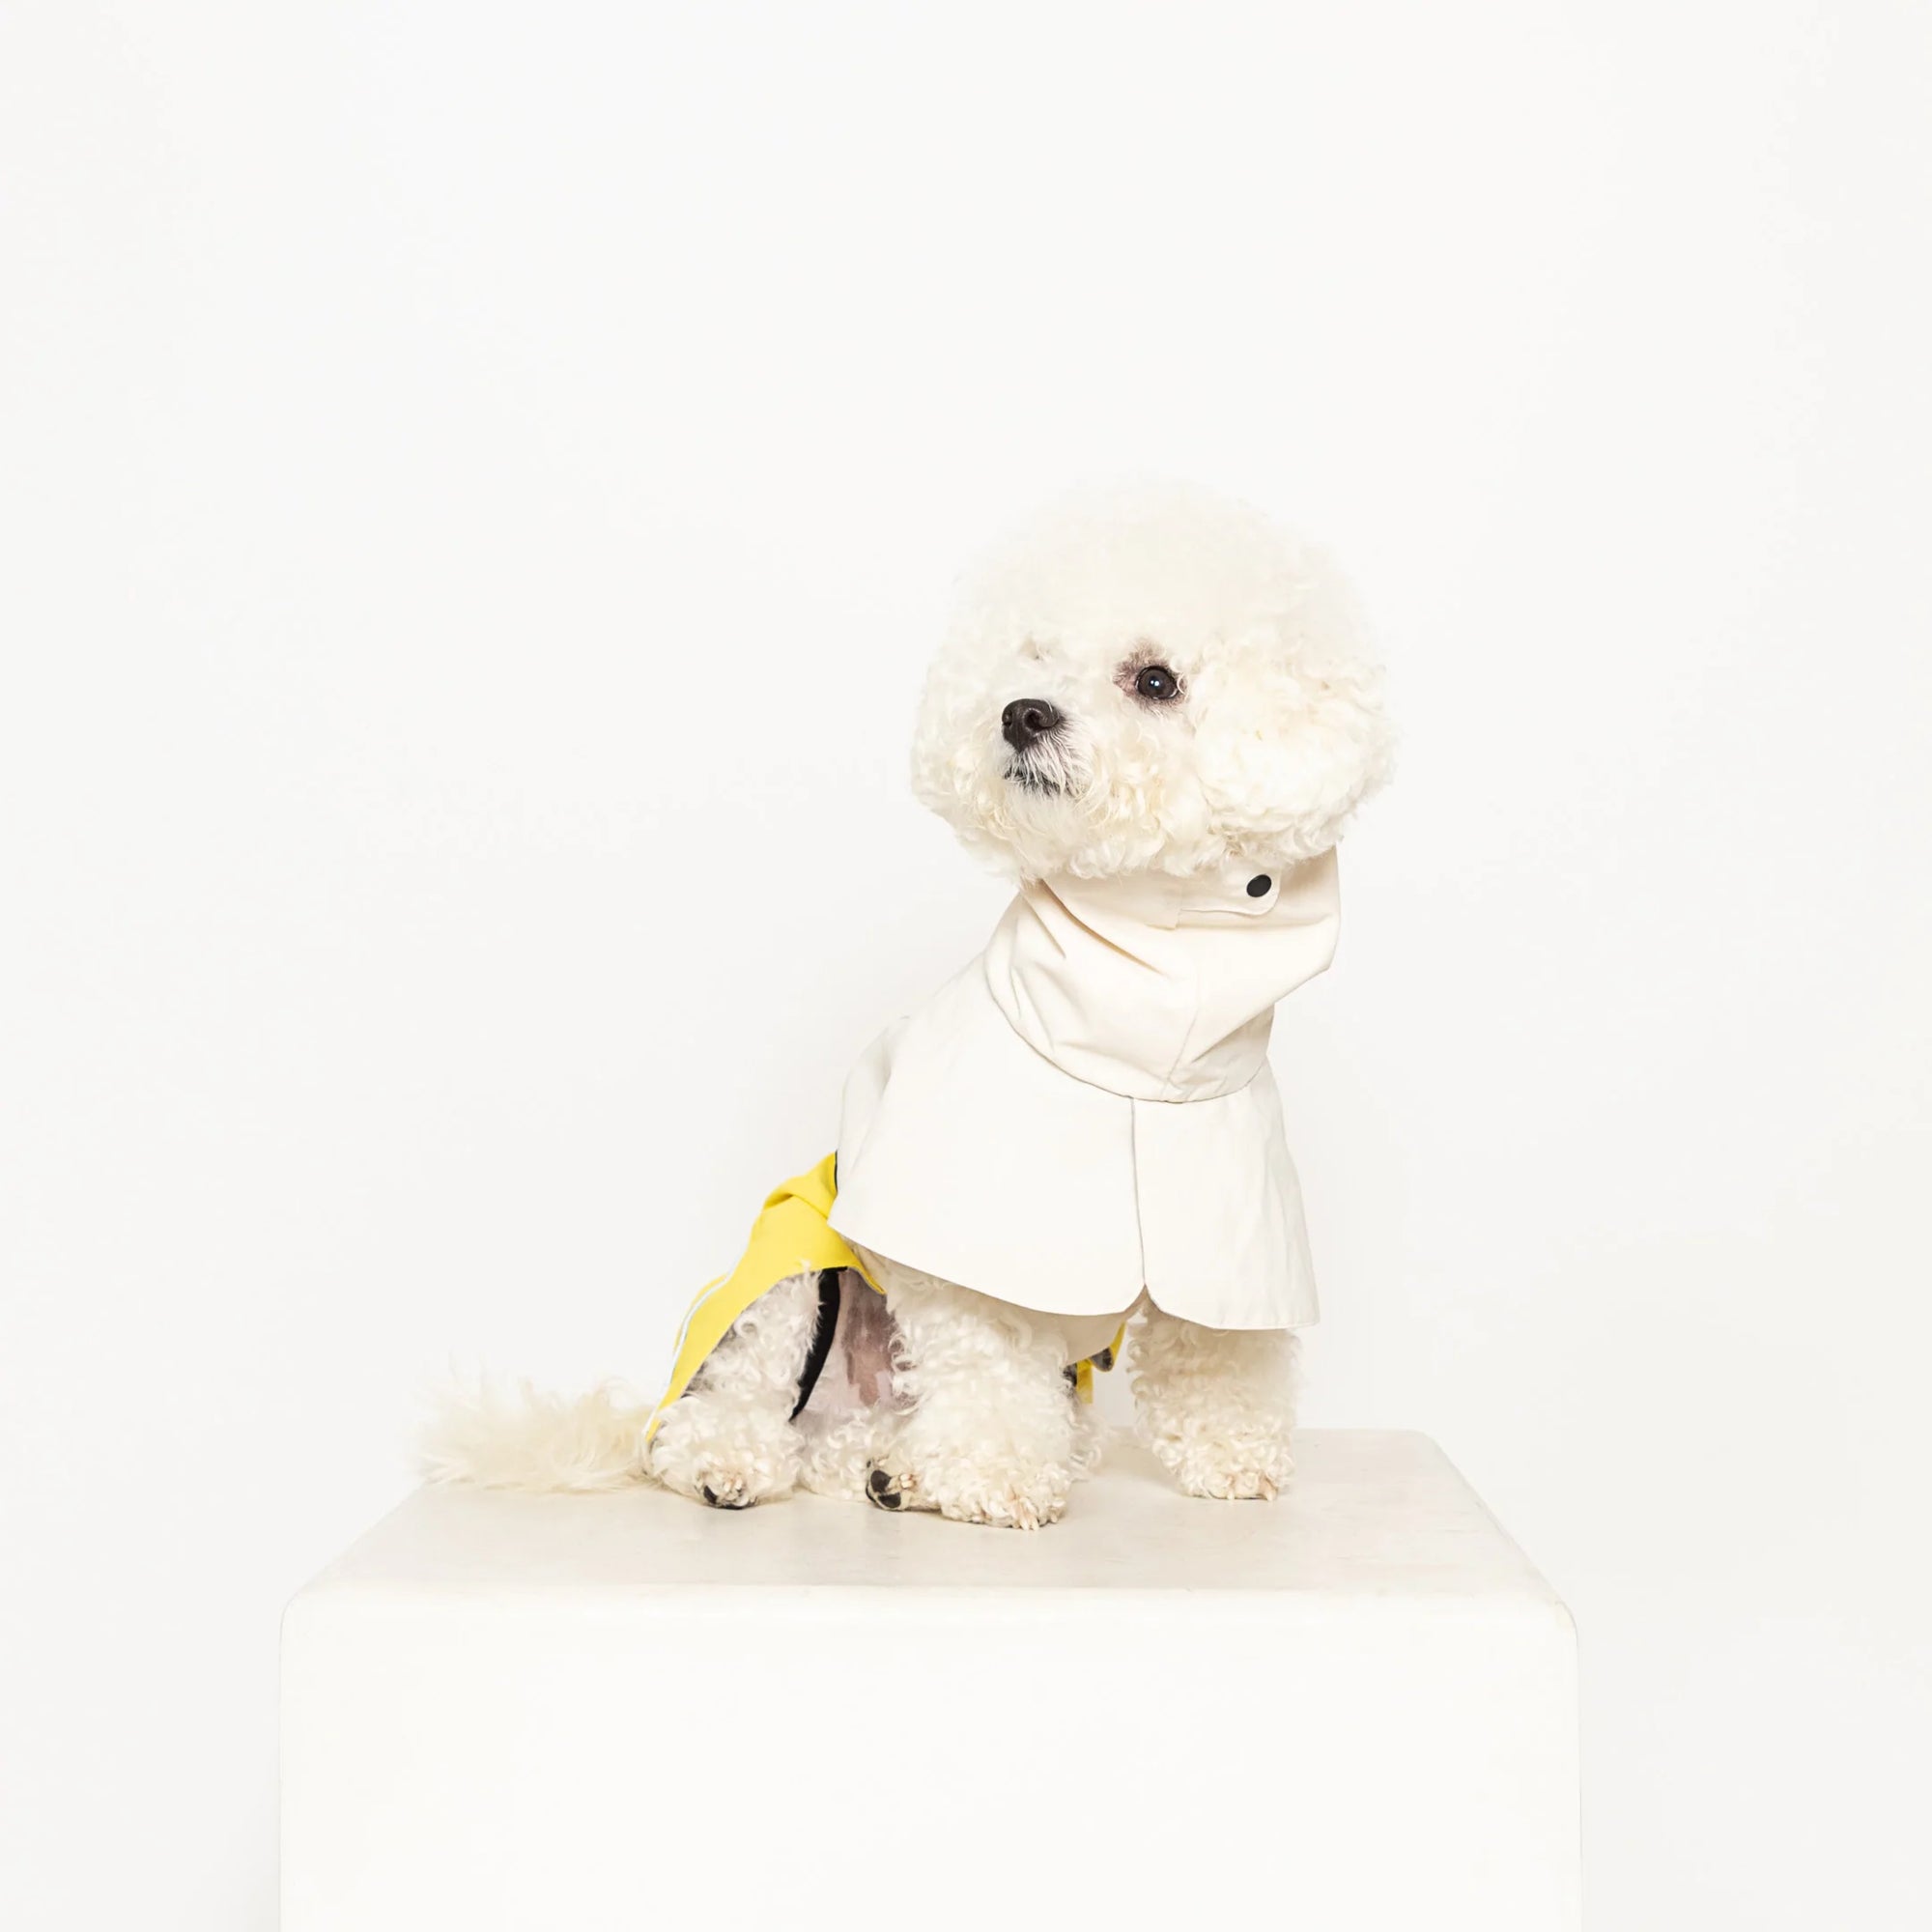 Fluffy white dog poised on a block in a chic yellow-trimmed raincoat.